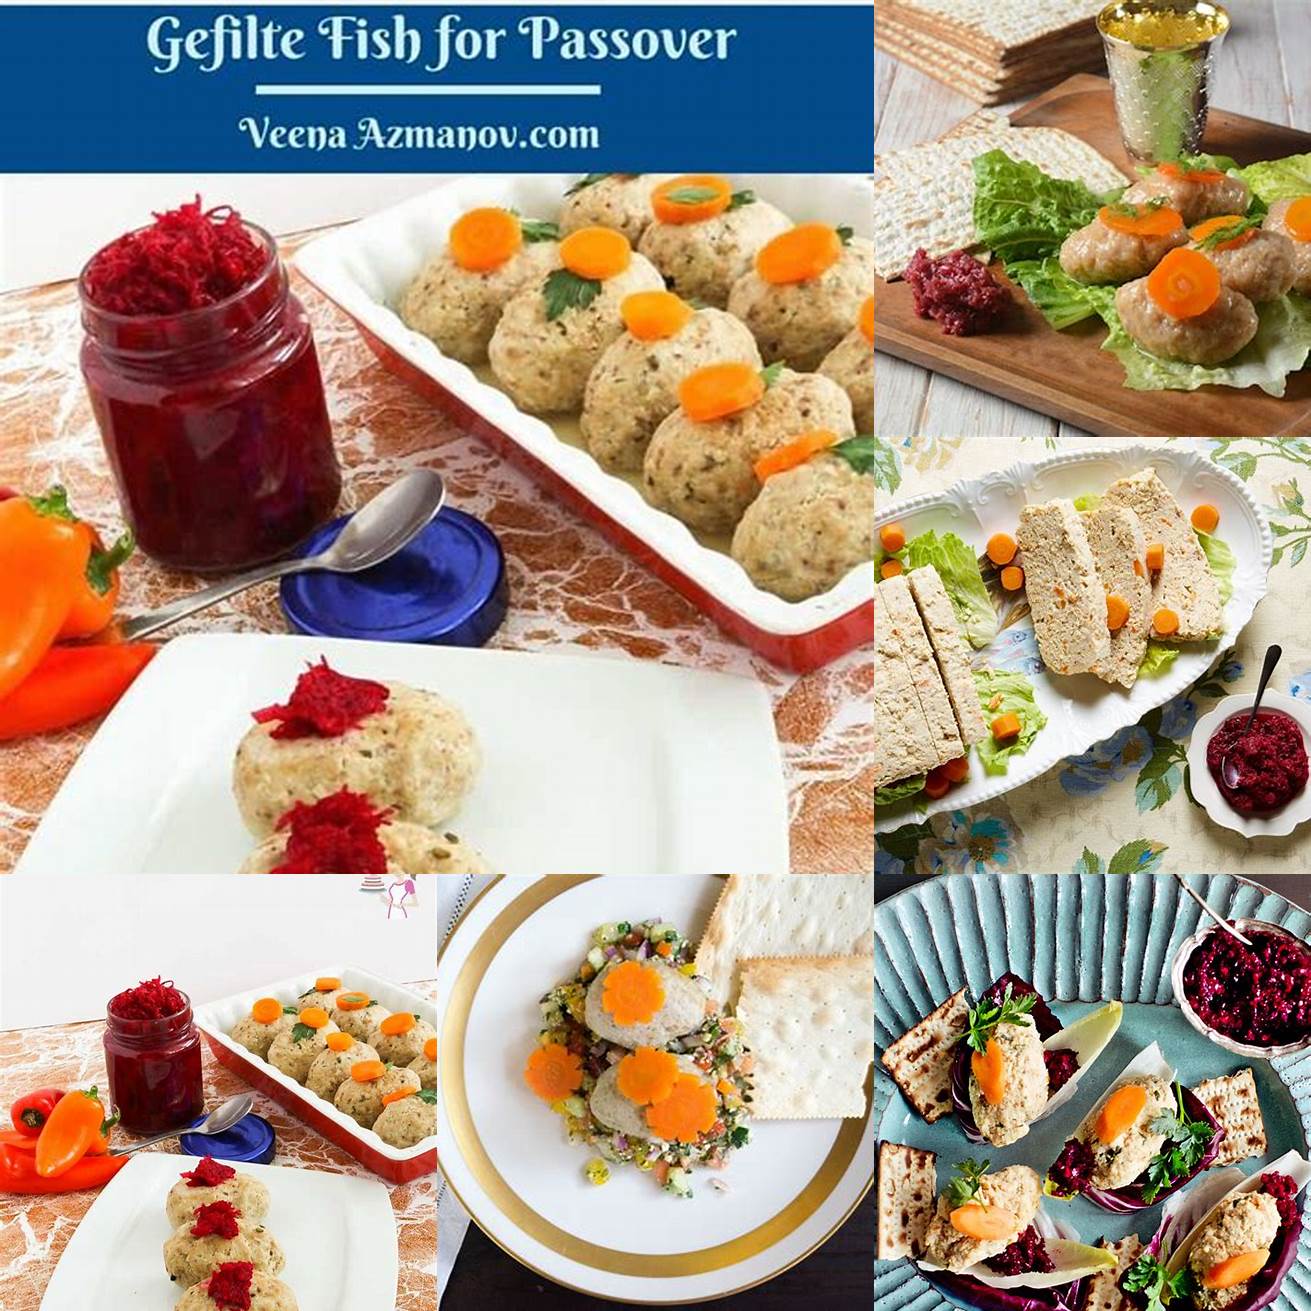 Try experimenting with traditional Jewish ingredients like matzo meal gefilte fish and challah bread These items can add a unique twist to classic recipes like meatballs or french toast